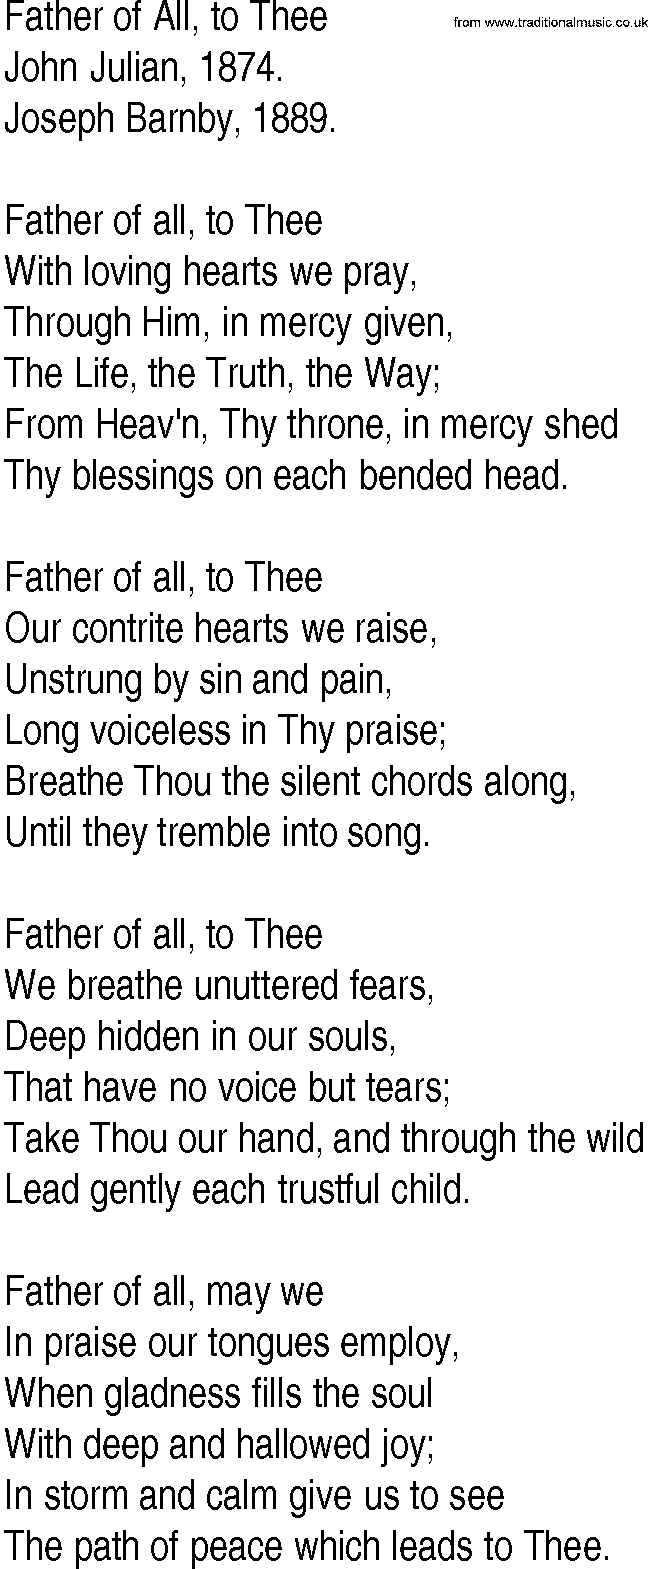 Hymn and Gospel Song: Father of All, to Thee by John Julian lyrics